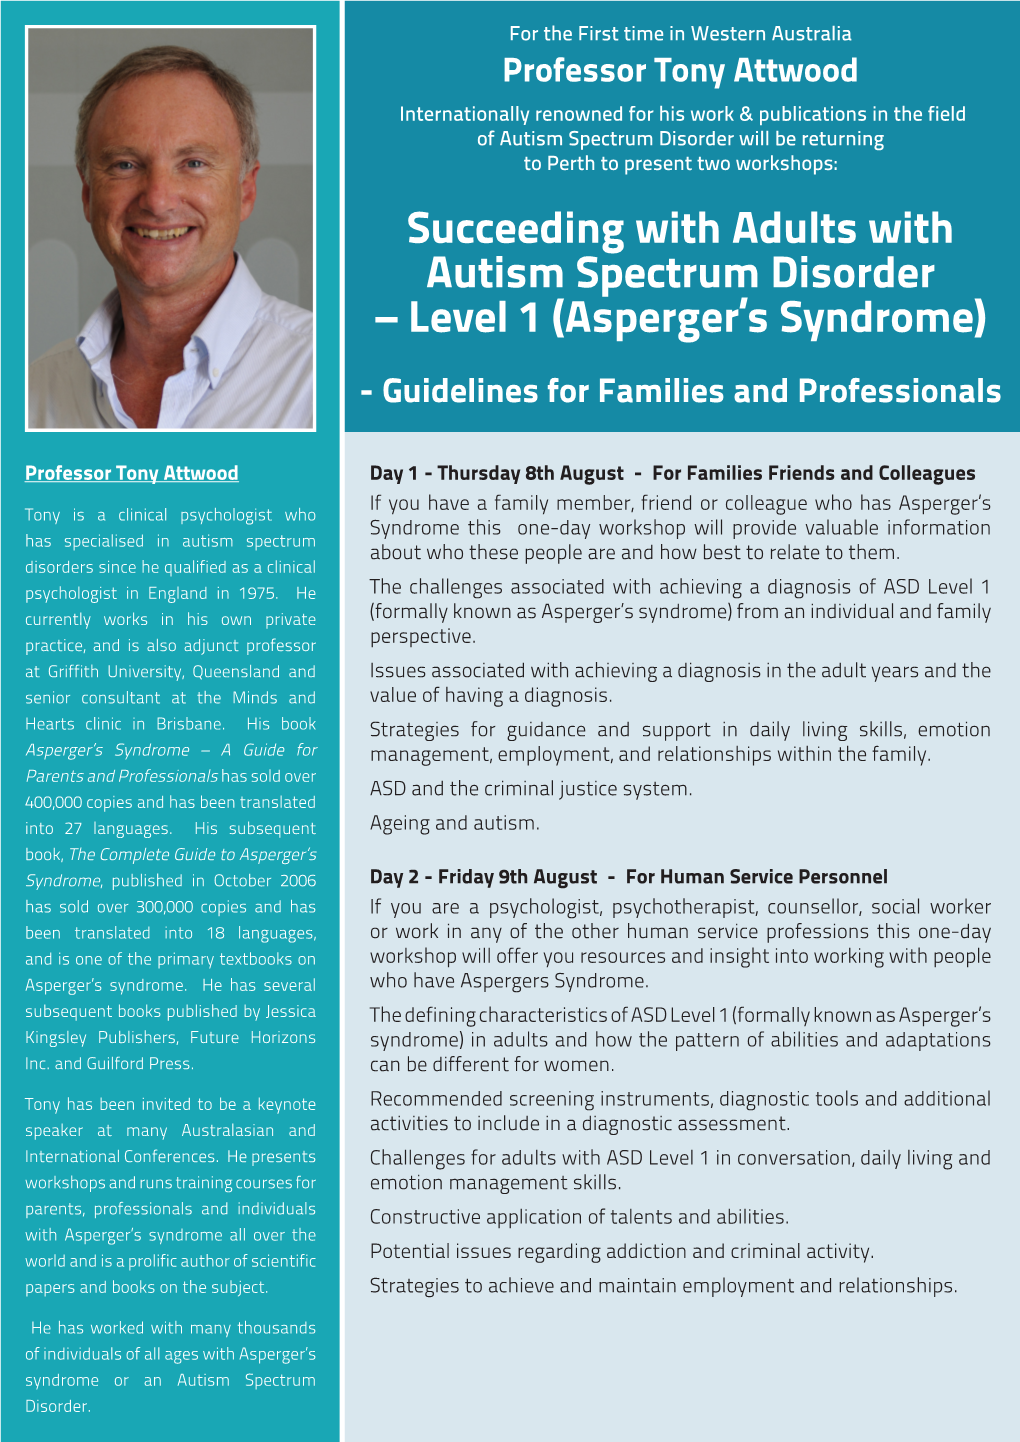 Succeeding with Adults with Autism Spectrum Disorder – Level 1 (Asperger's Syndrome)